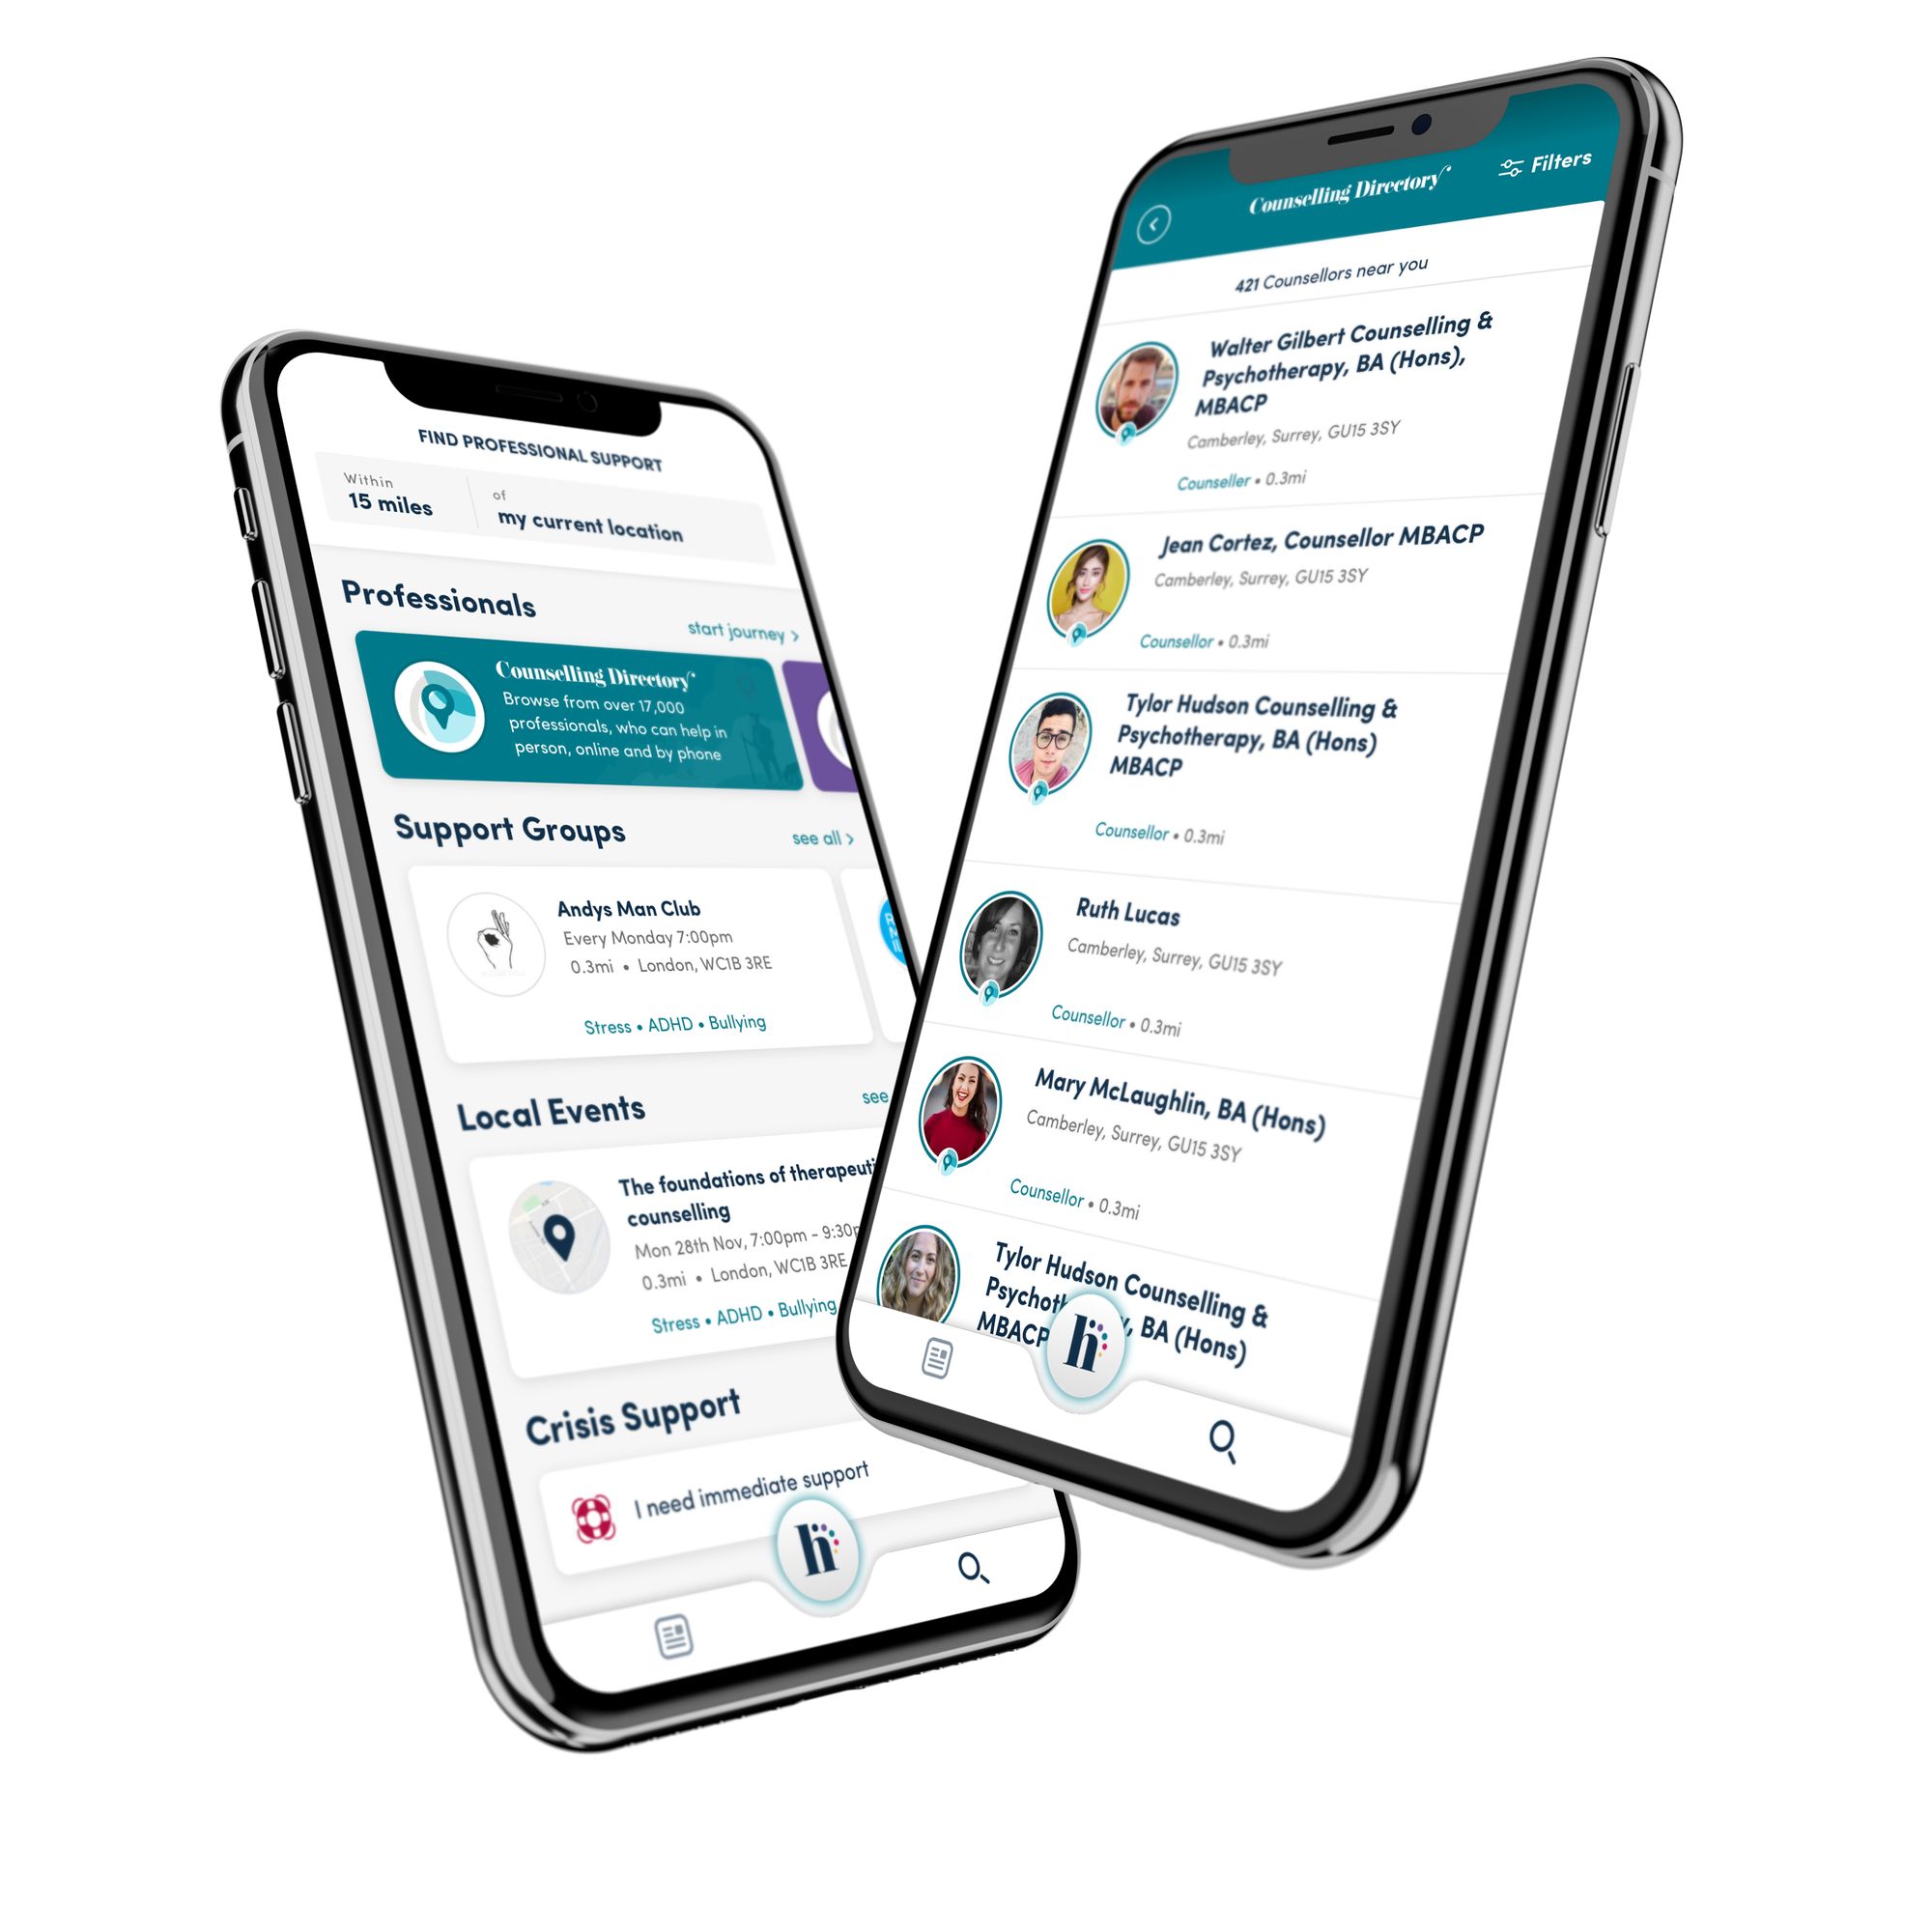 the connect screen of Happiful app shows the types of help from counselling to complementary therapies